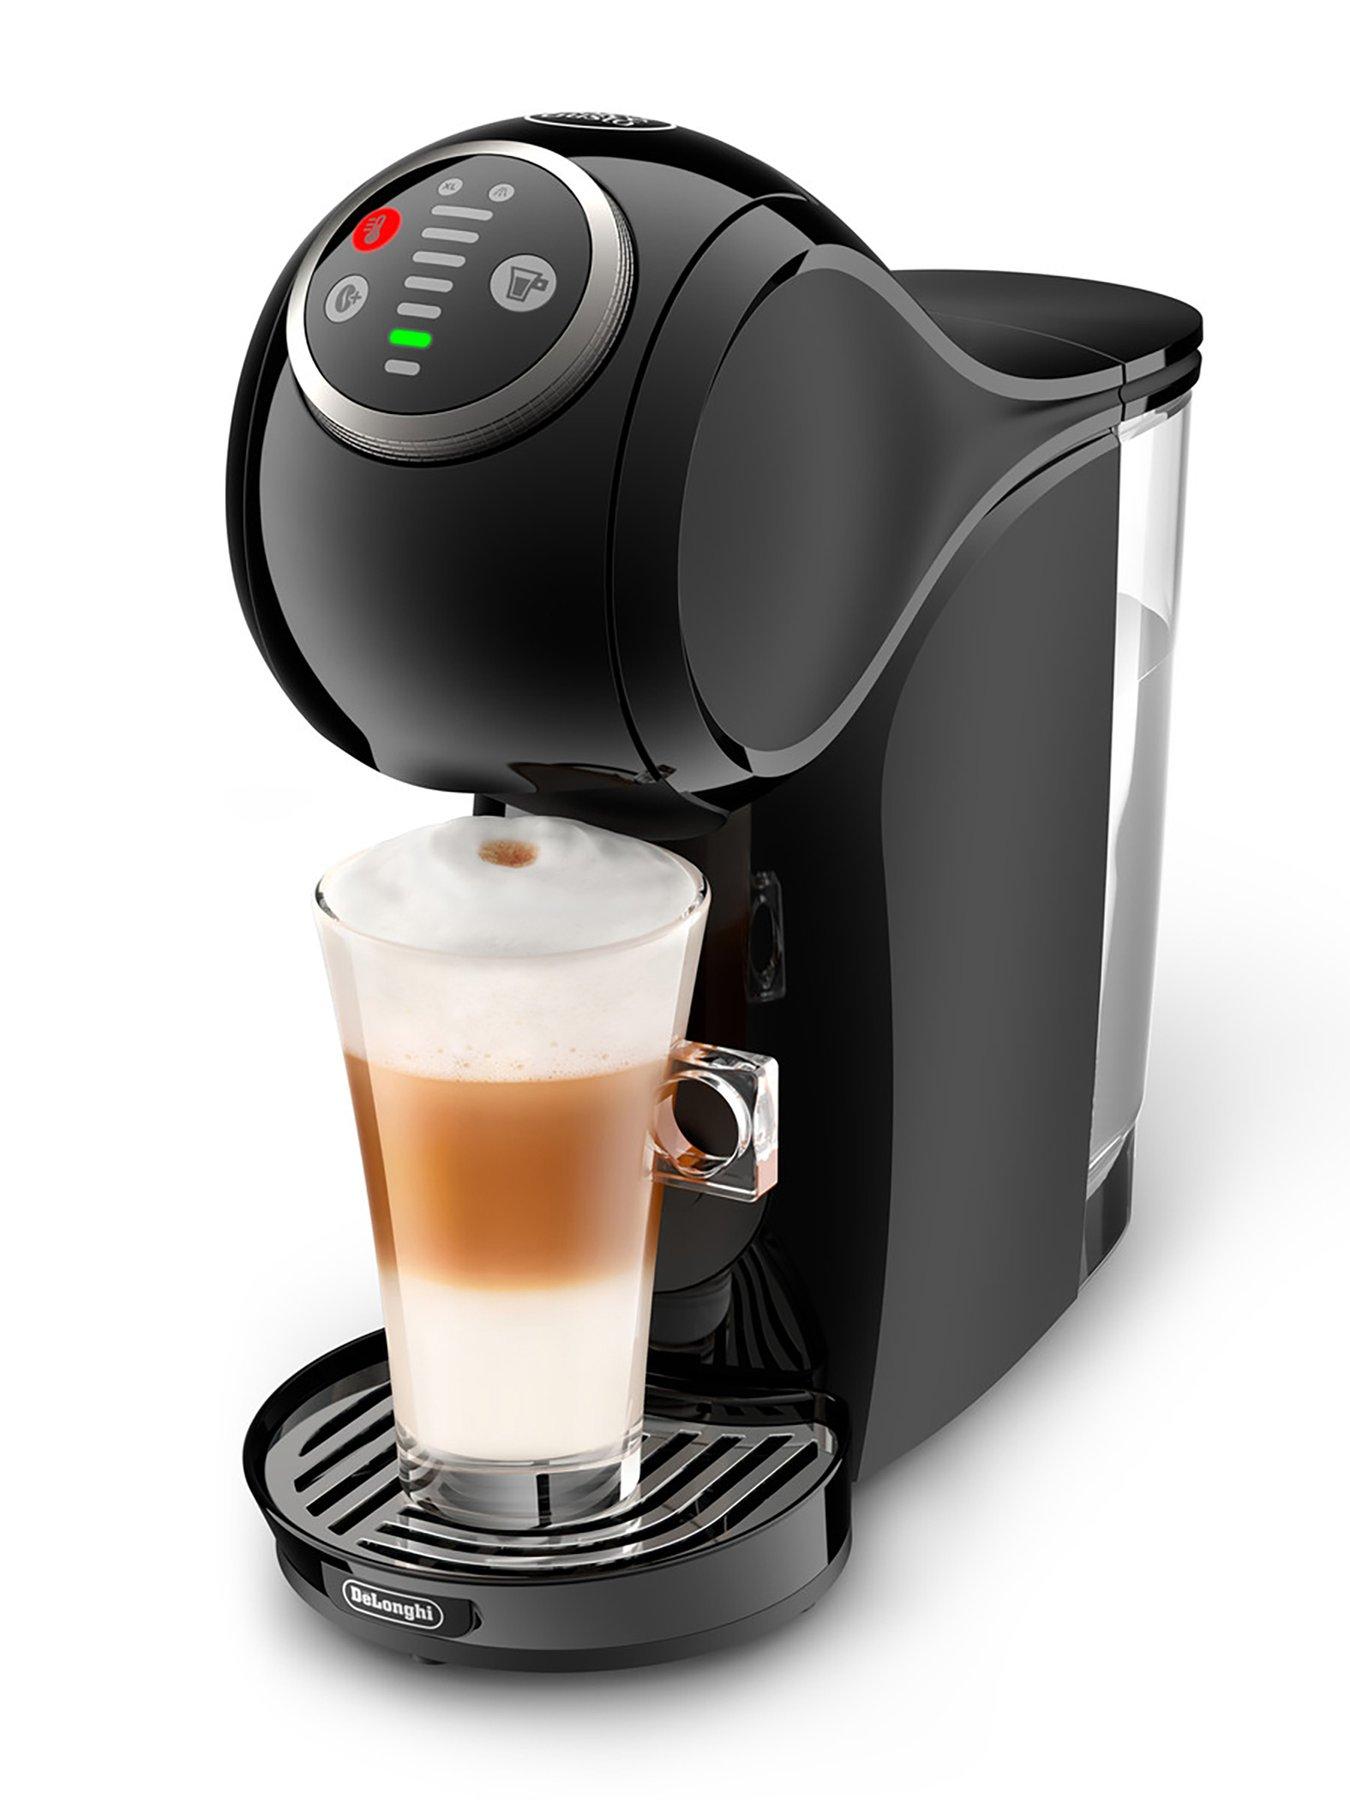 How to Descale a Dolce Gusto Coffee Machine - 8 EASY Steps